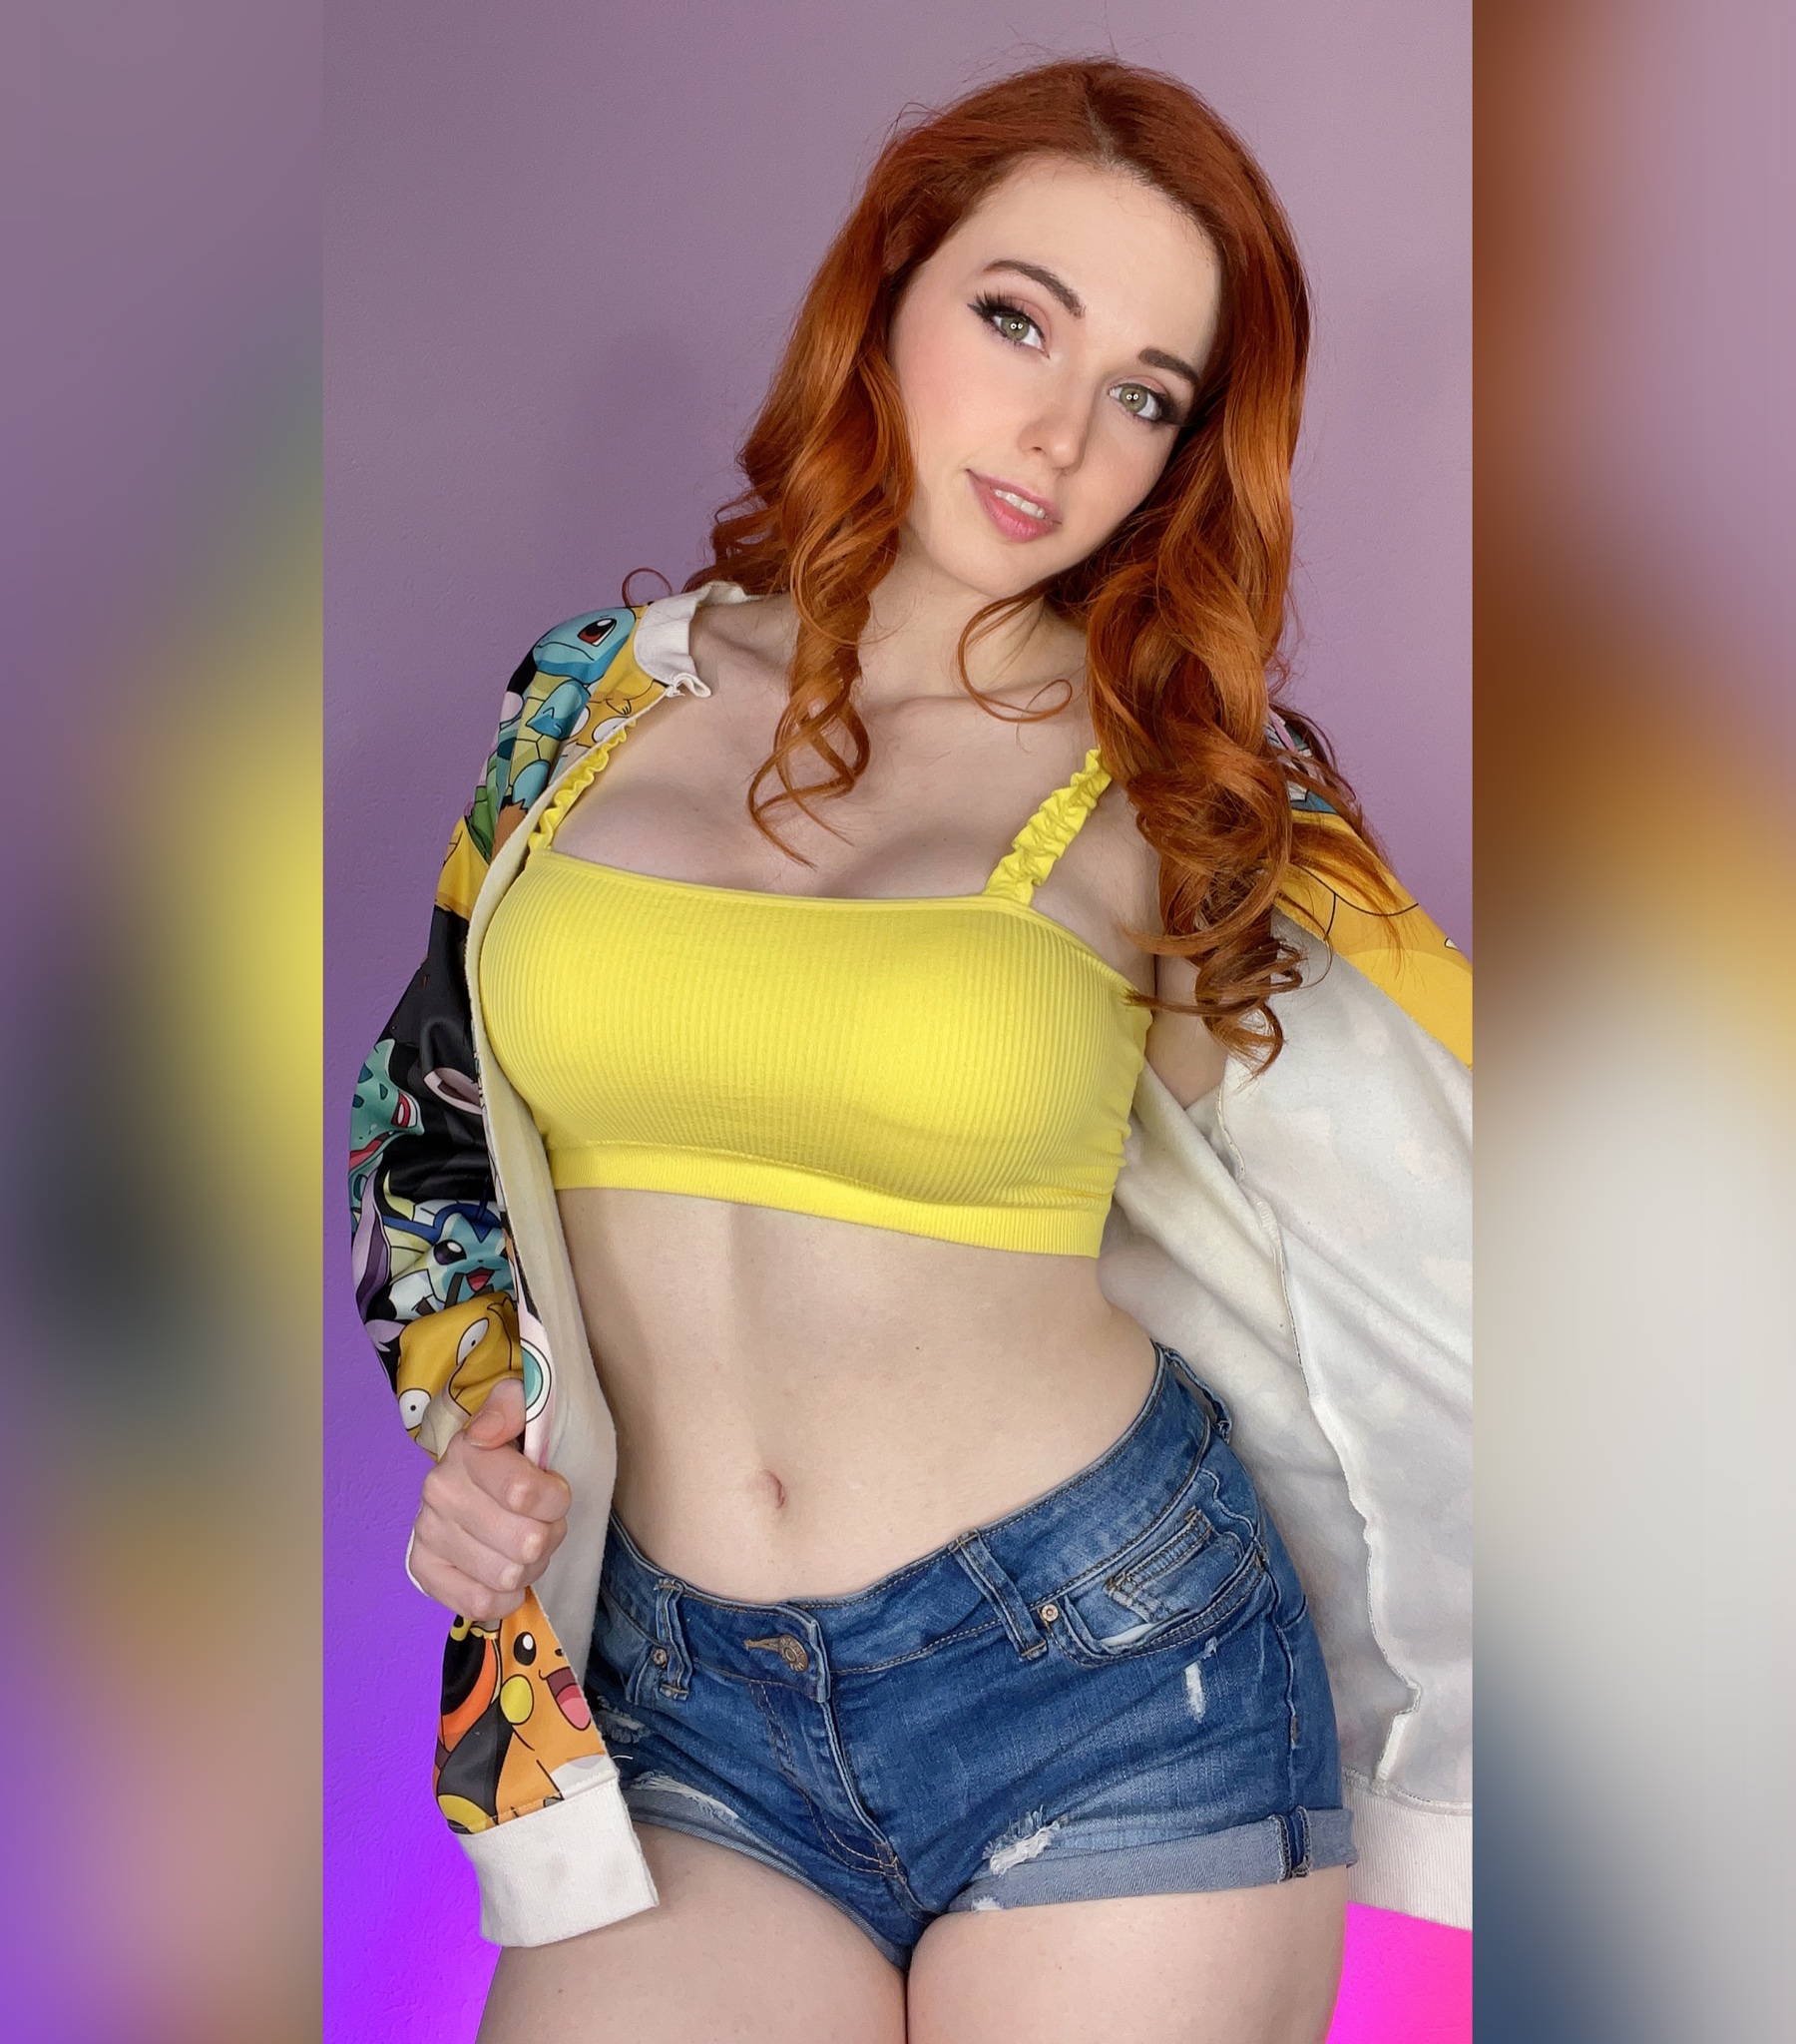 Amouranth full nude